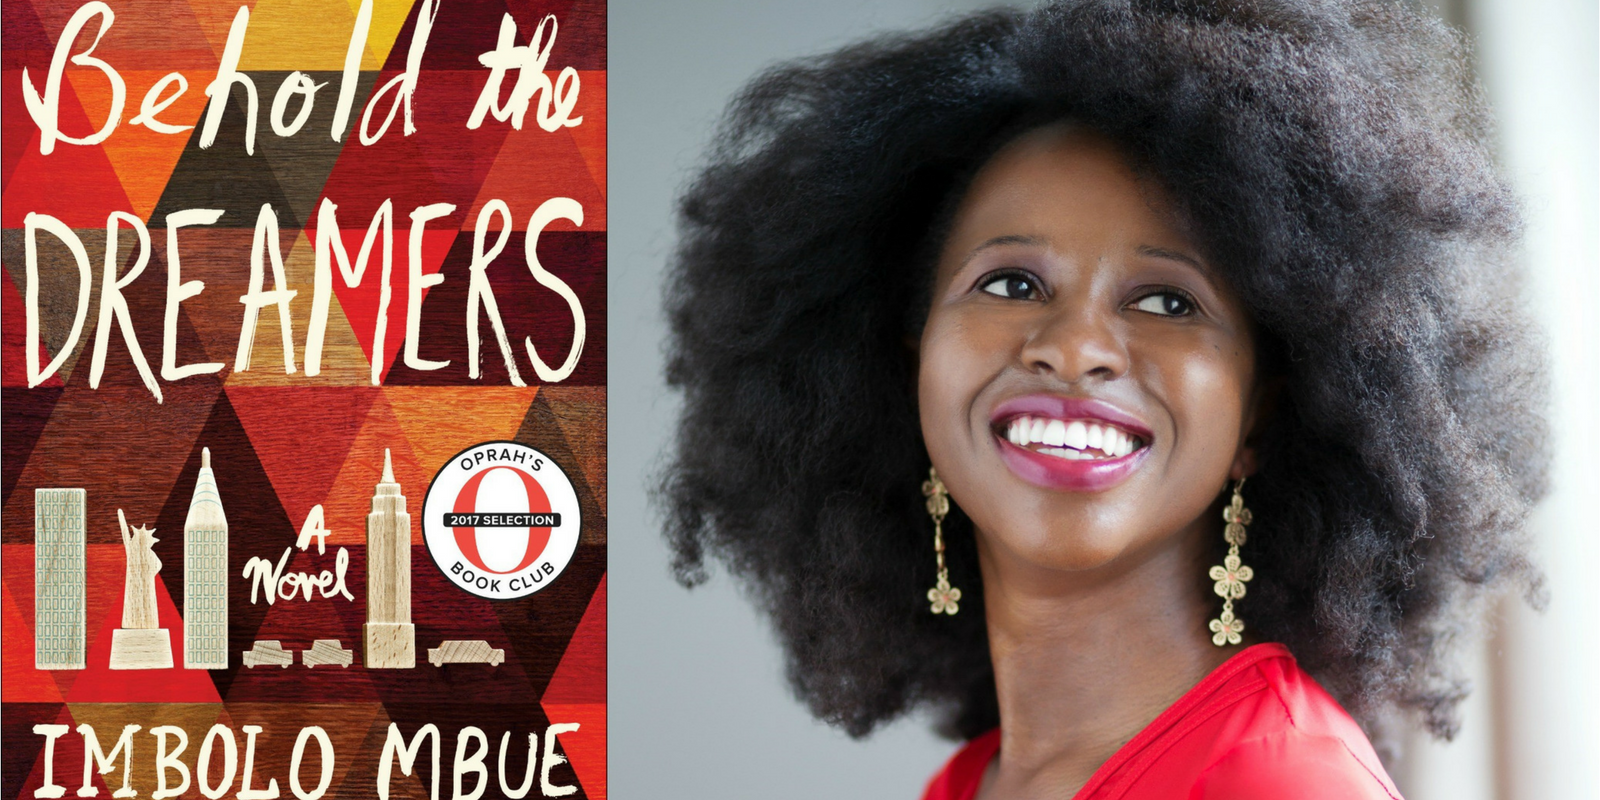 Oprah’s Book Club selects Behold the Dreamers by Imbolo Mbue